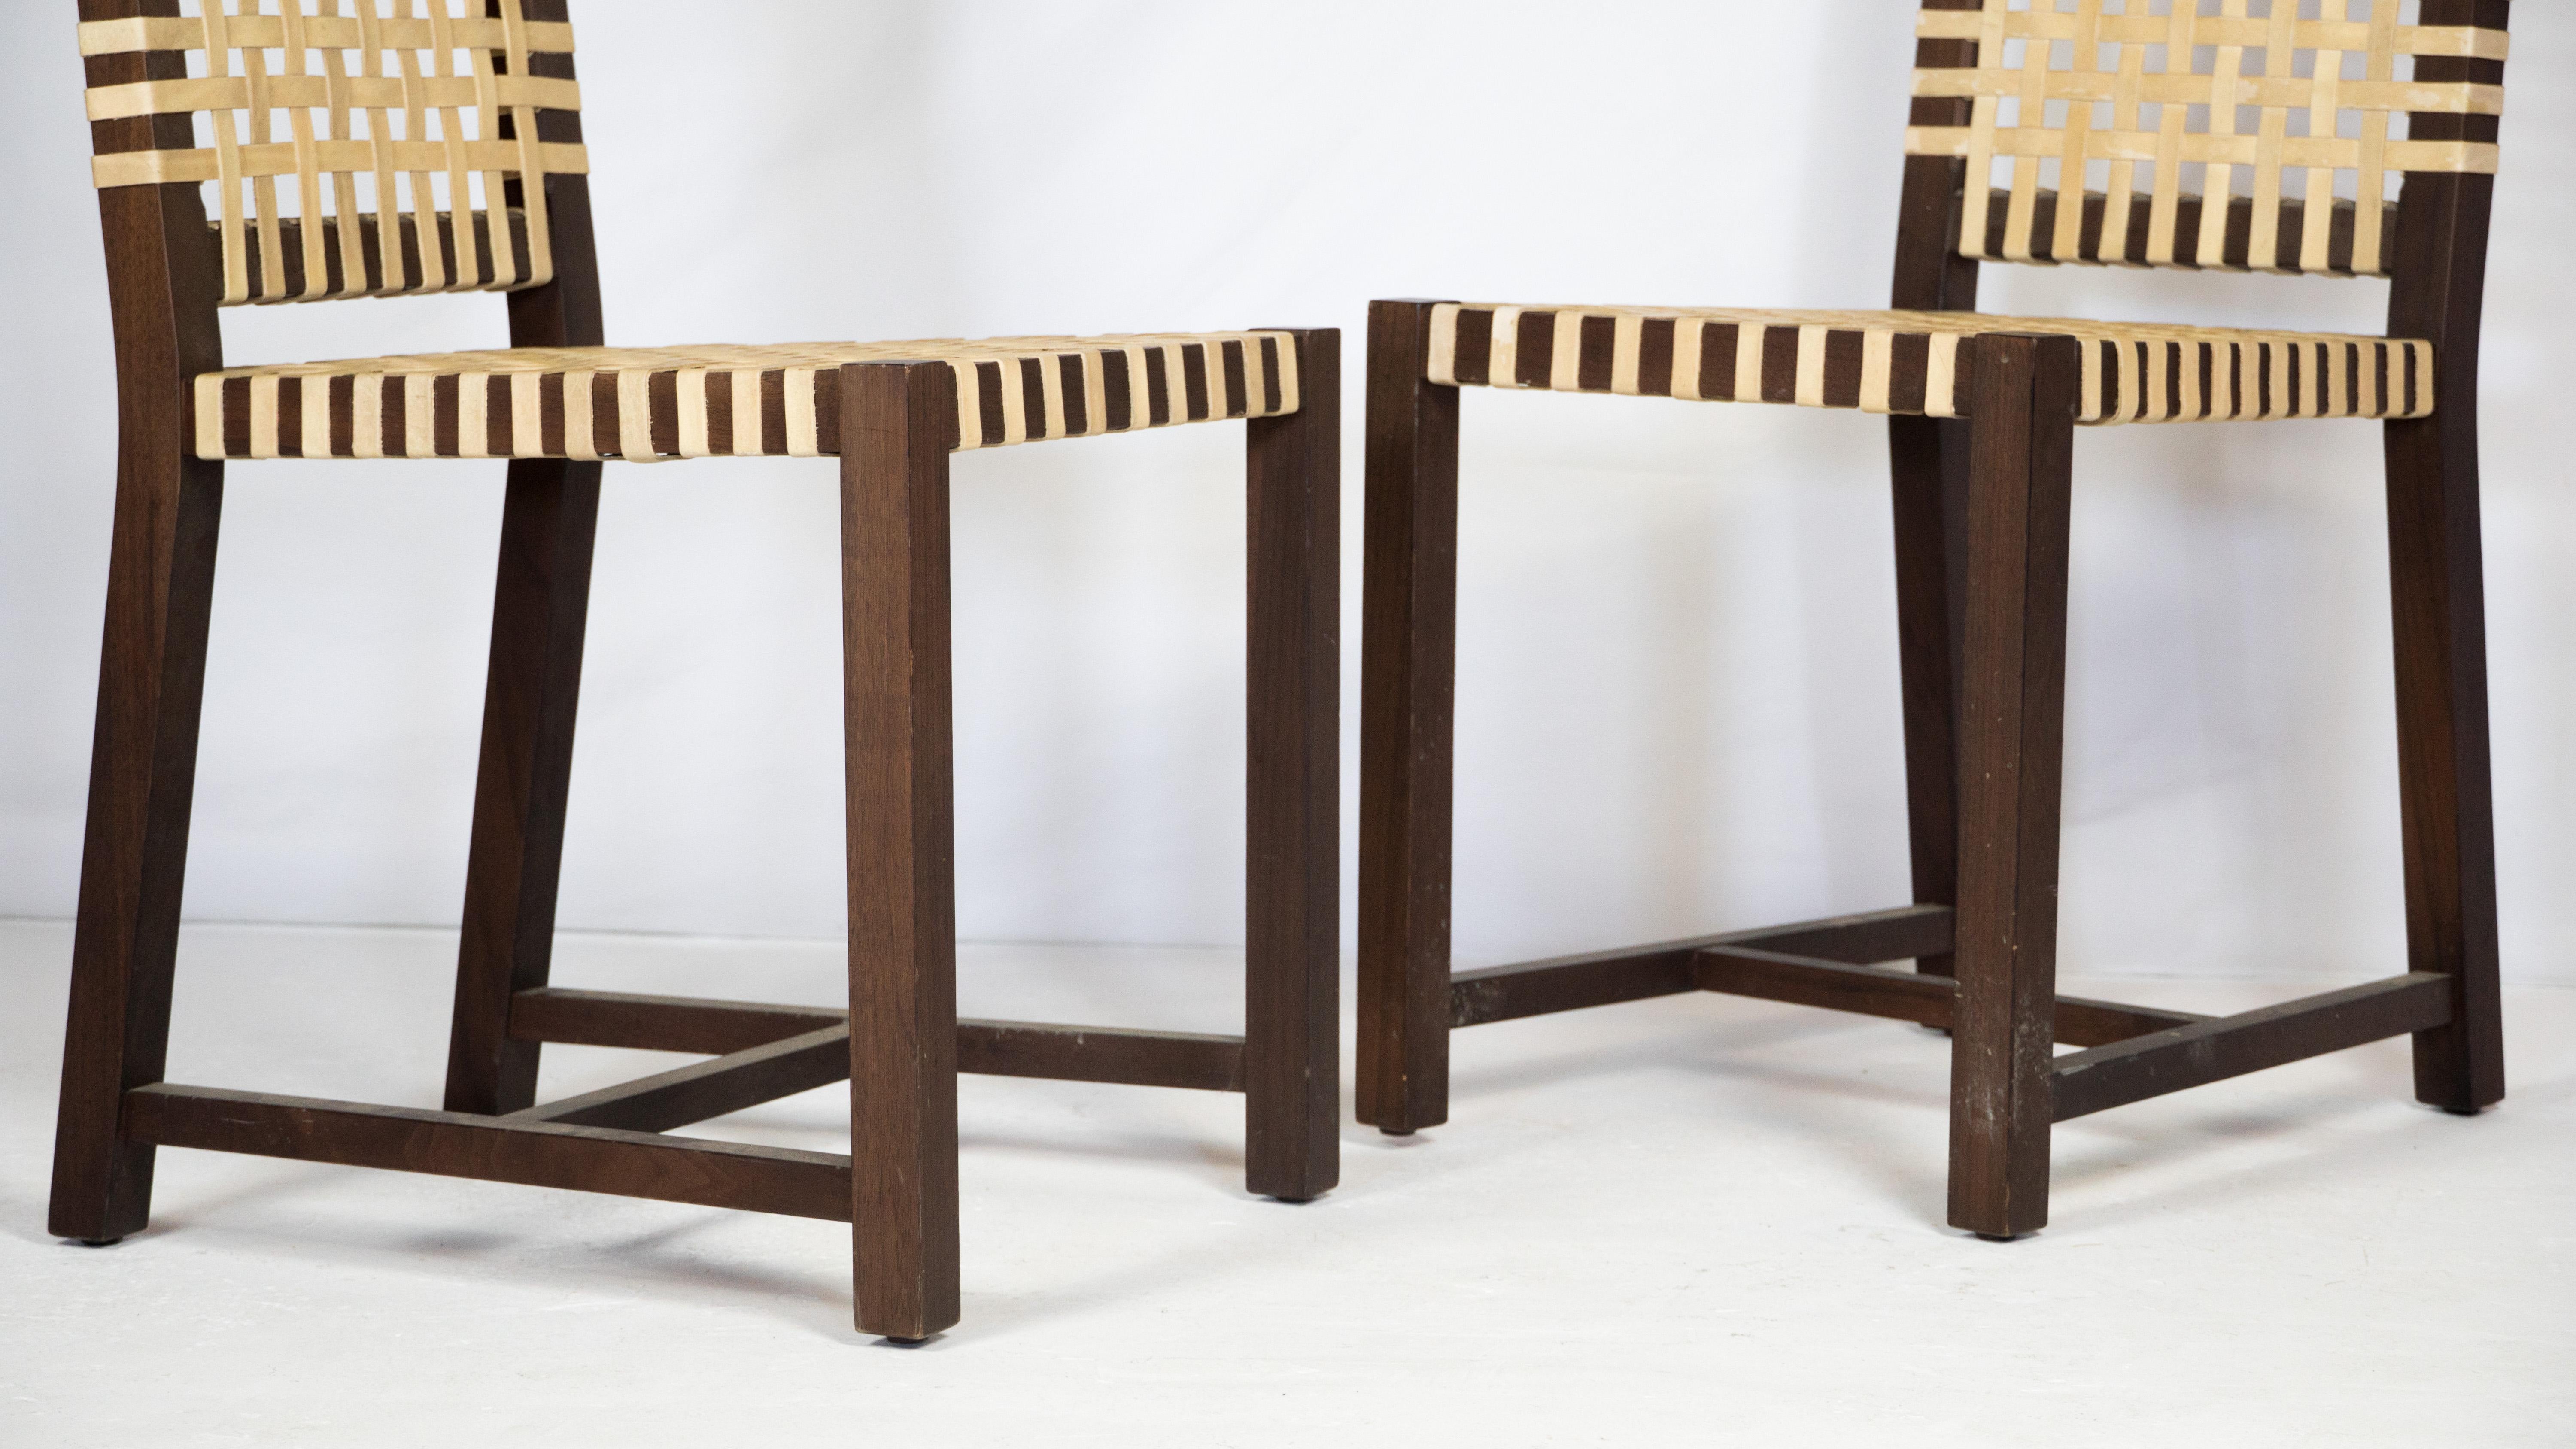 1980s Italian Architectural Otto 121' High Back Chairs by Paola Navone for Gerva For Sale 5